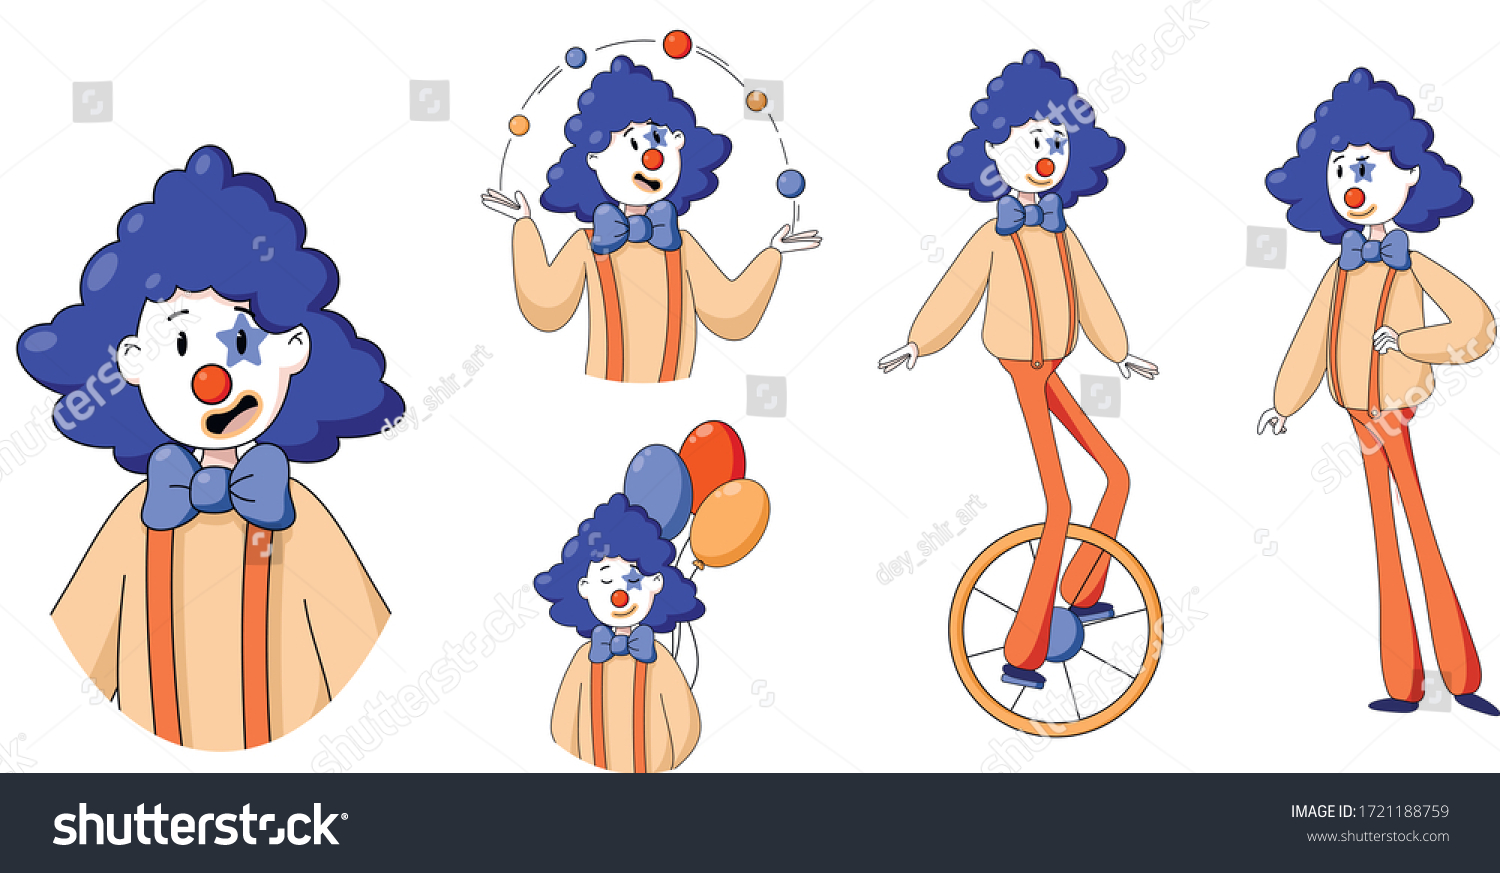 Hot Clown with Blue Hair - wide 10